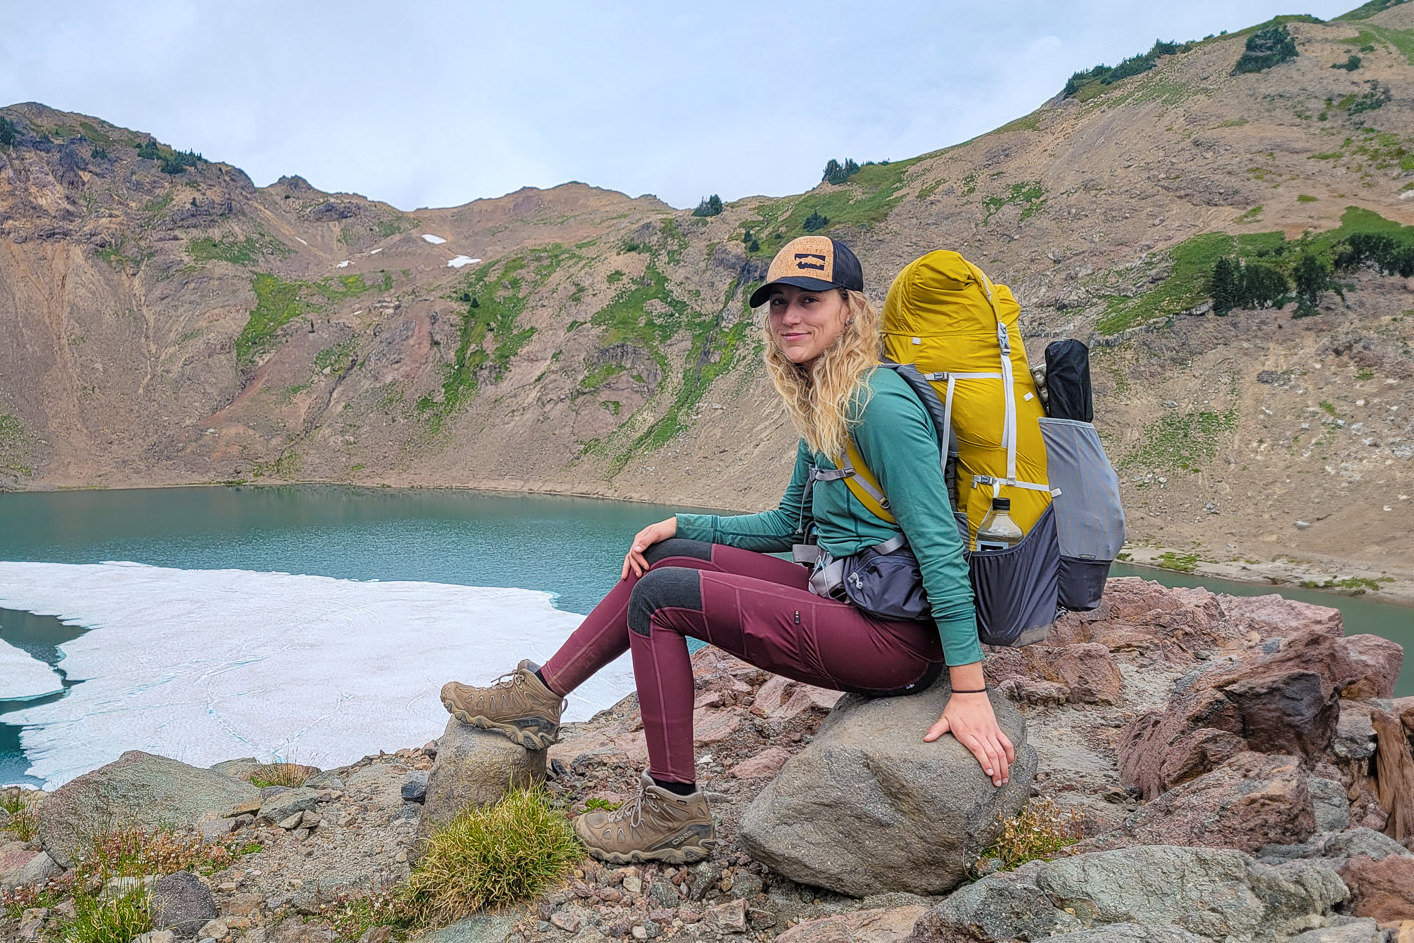 The Best Winter Hiking Pants for Women: Water-resistant, breathable and  comfortable